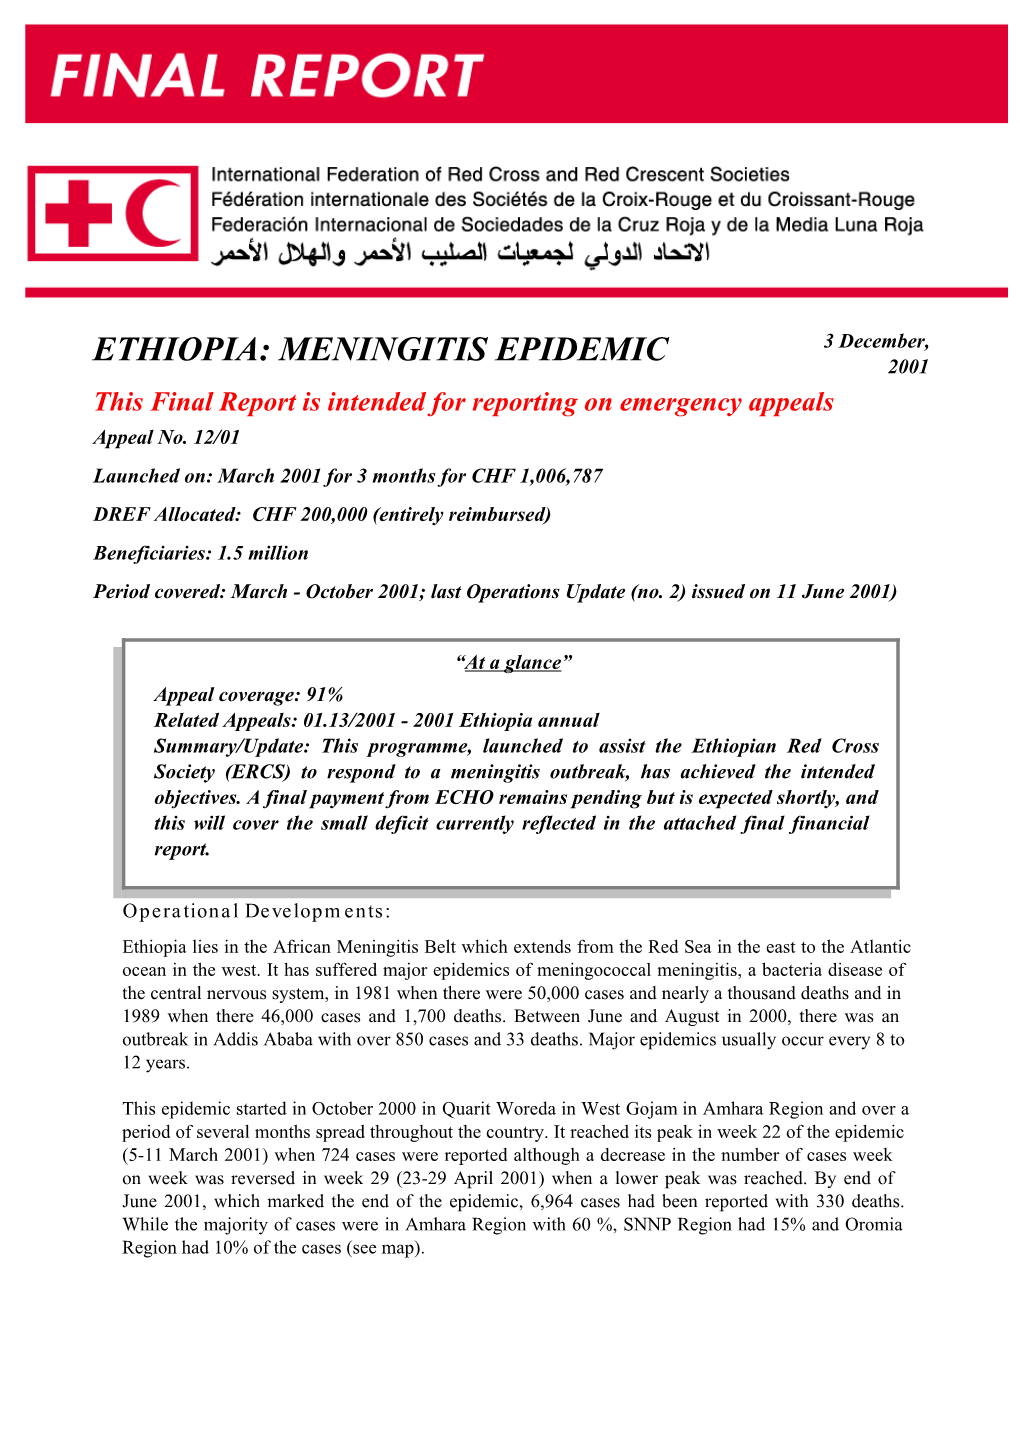 ETHIOPIA: MENINGITIS EPIDEMIC 2001 This Final Report Is Intended for Reporting on Emergency Appeals Appeal No